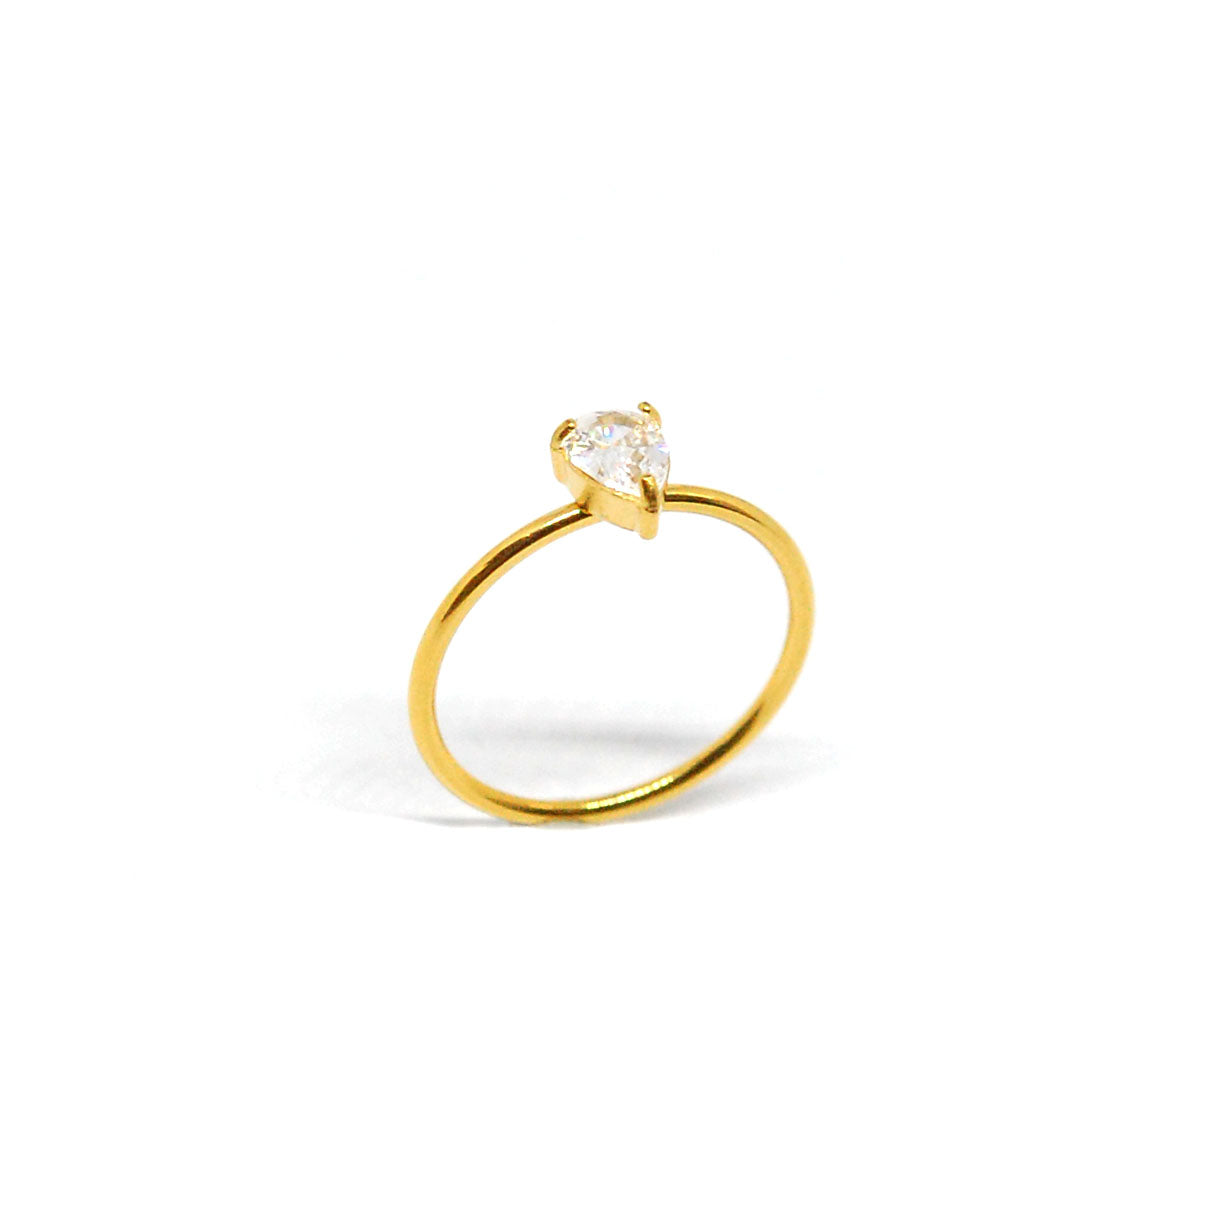 ESR 7864: Terry Gold-Plated TearDrop Cz Solitaire Ring